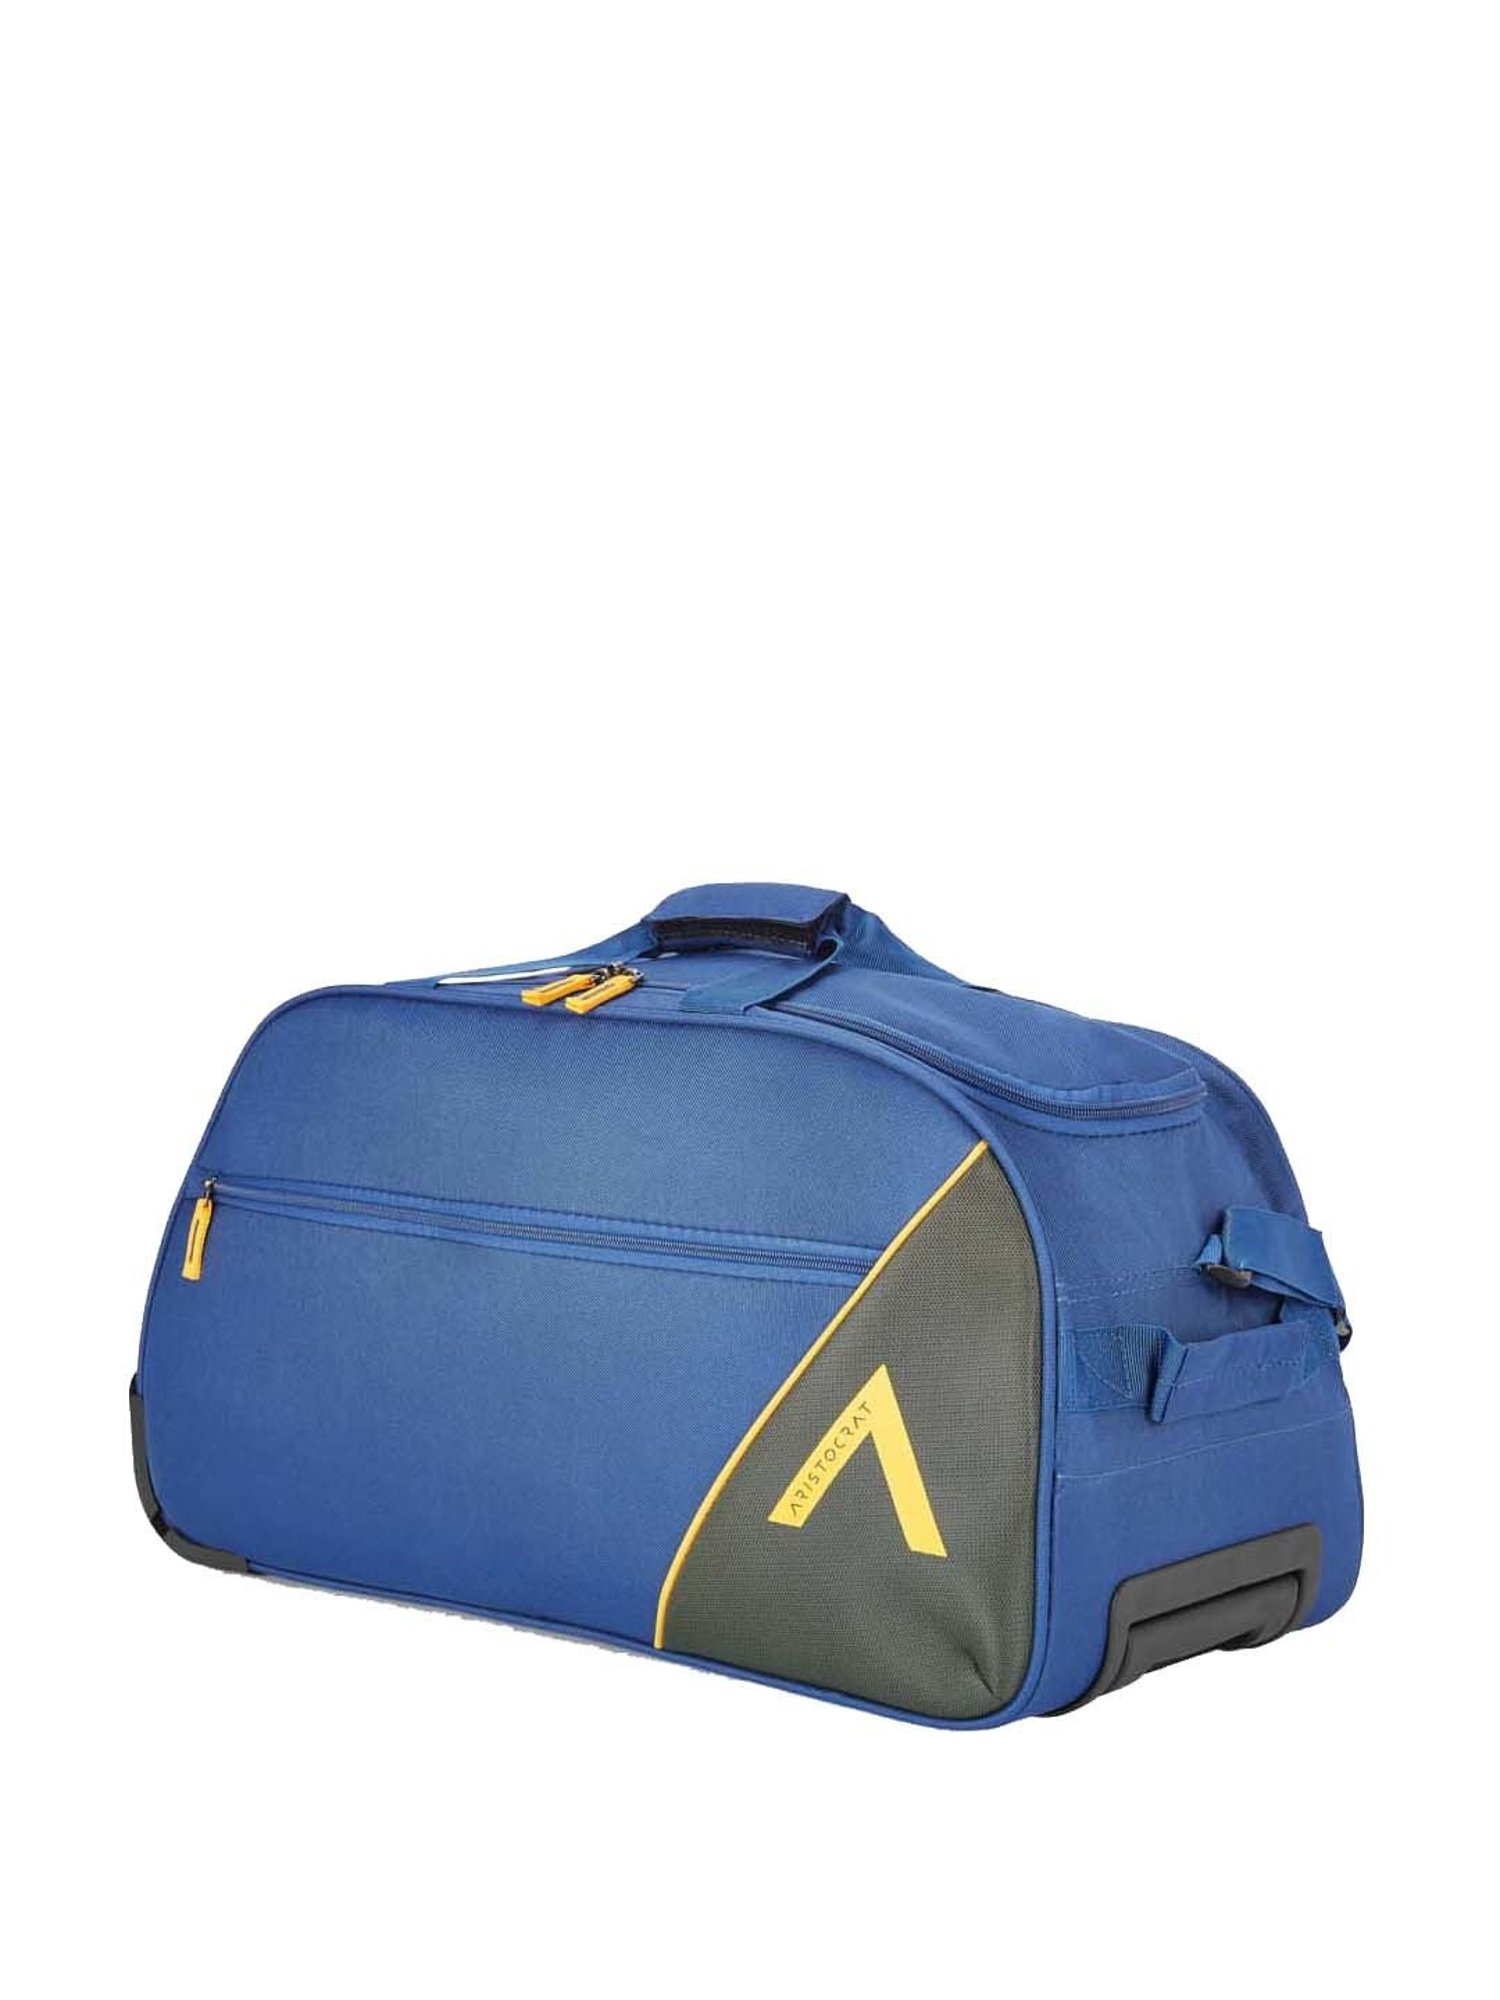 Buy Aristocrat Cadet Polyester 52 Cms Wheel Travel Duffle Bag (Blue) Online  at Lowest Price Ever in India | Check Reviews & Ratings - Shop The World